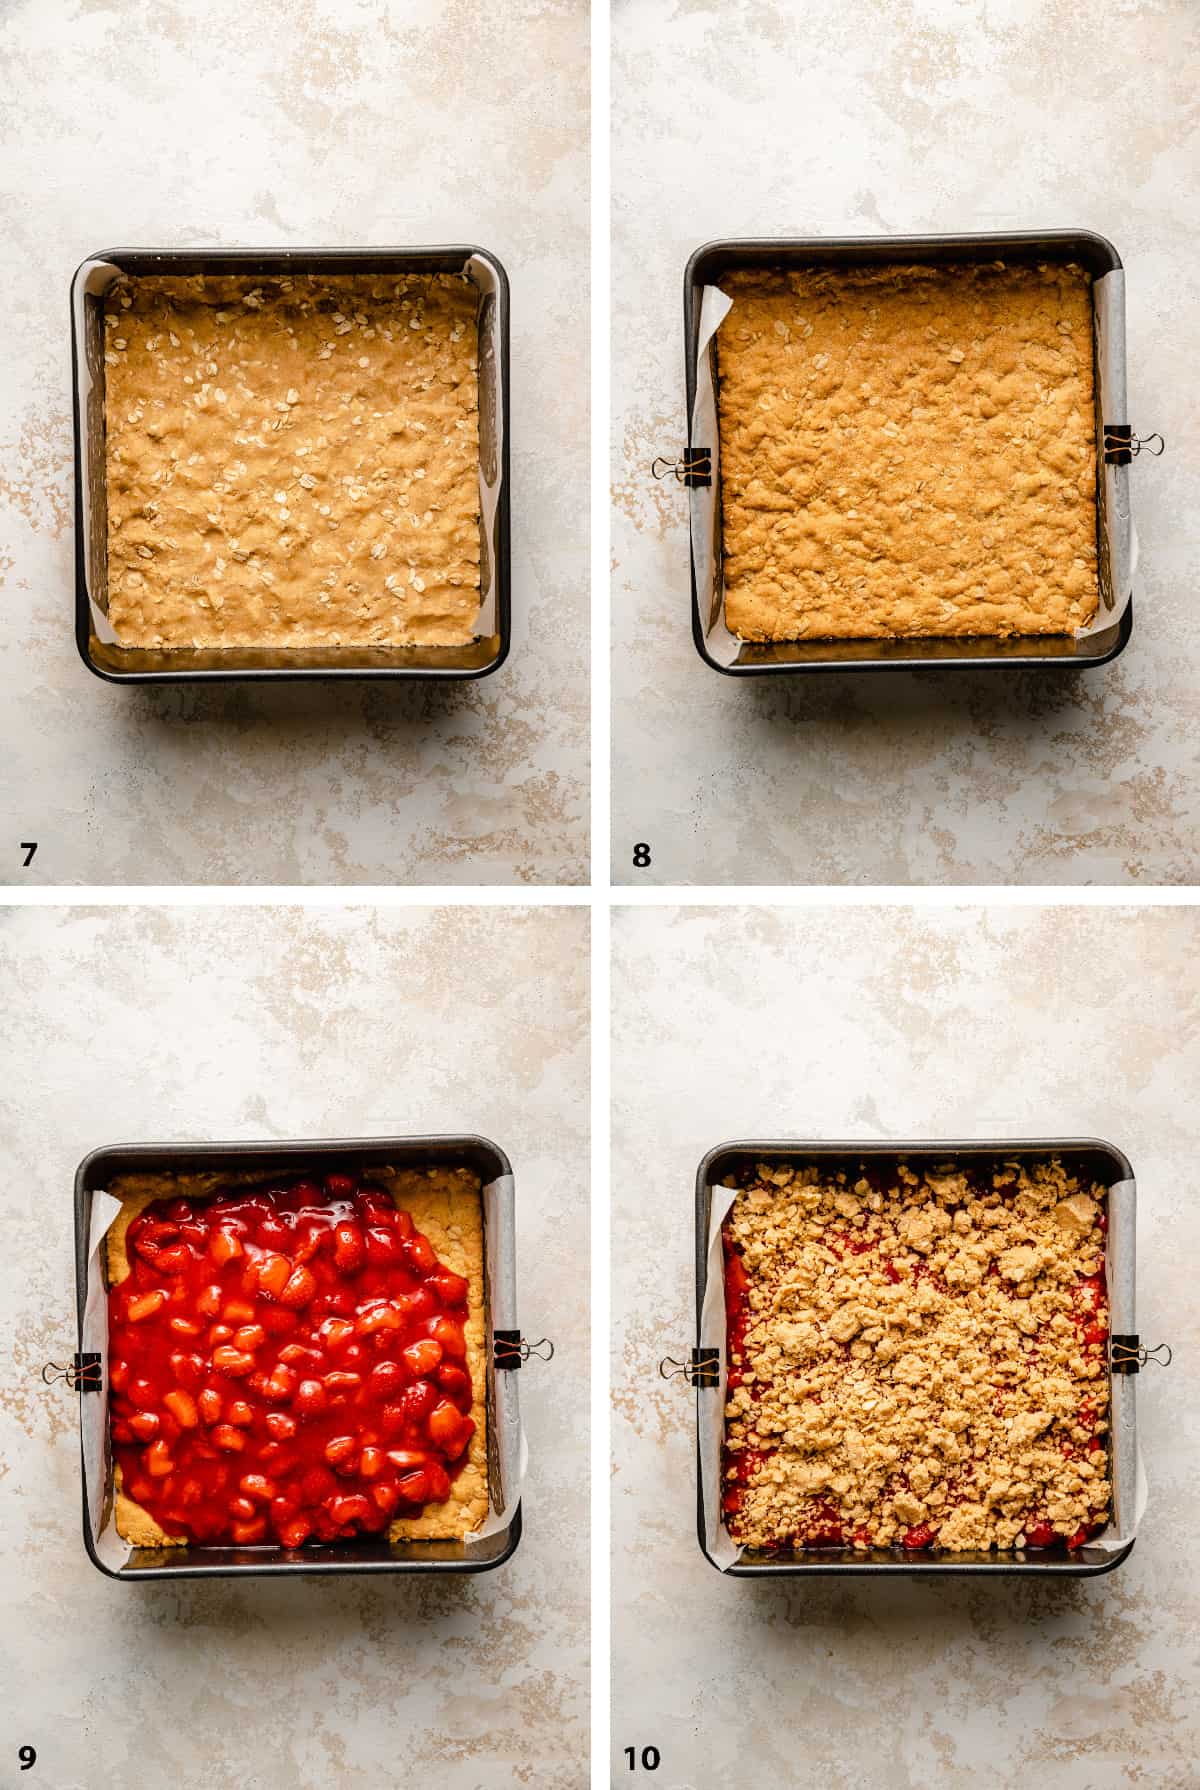 Steps of crumble base before and after baking and assembling the final strawberry bars before baking.